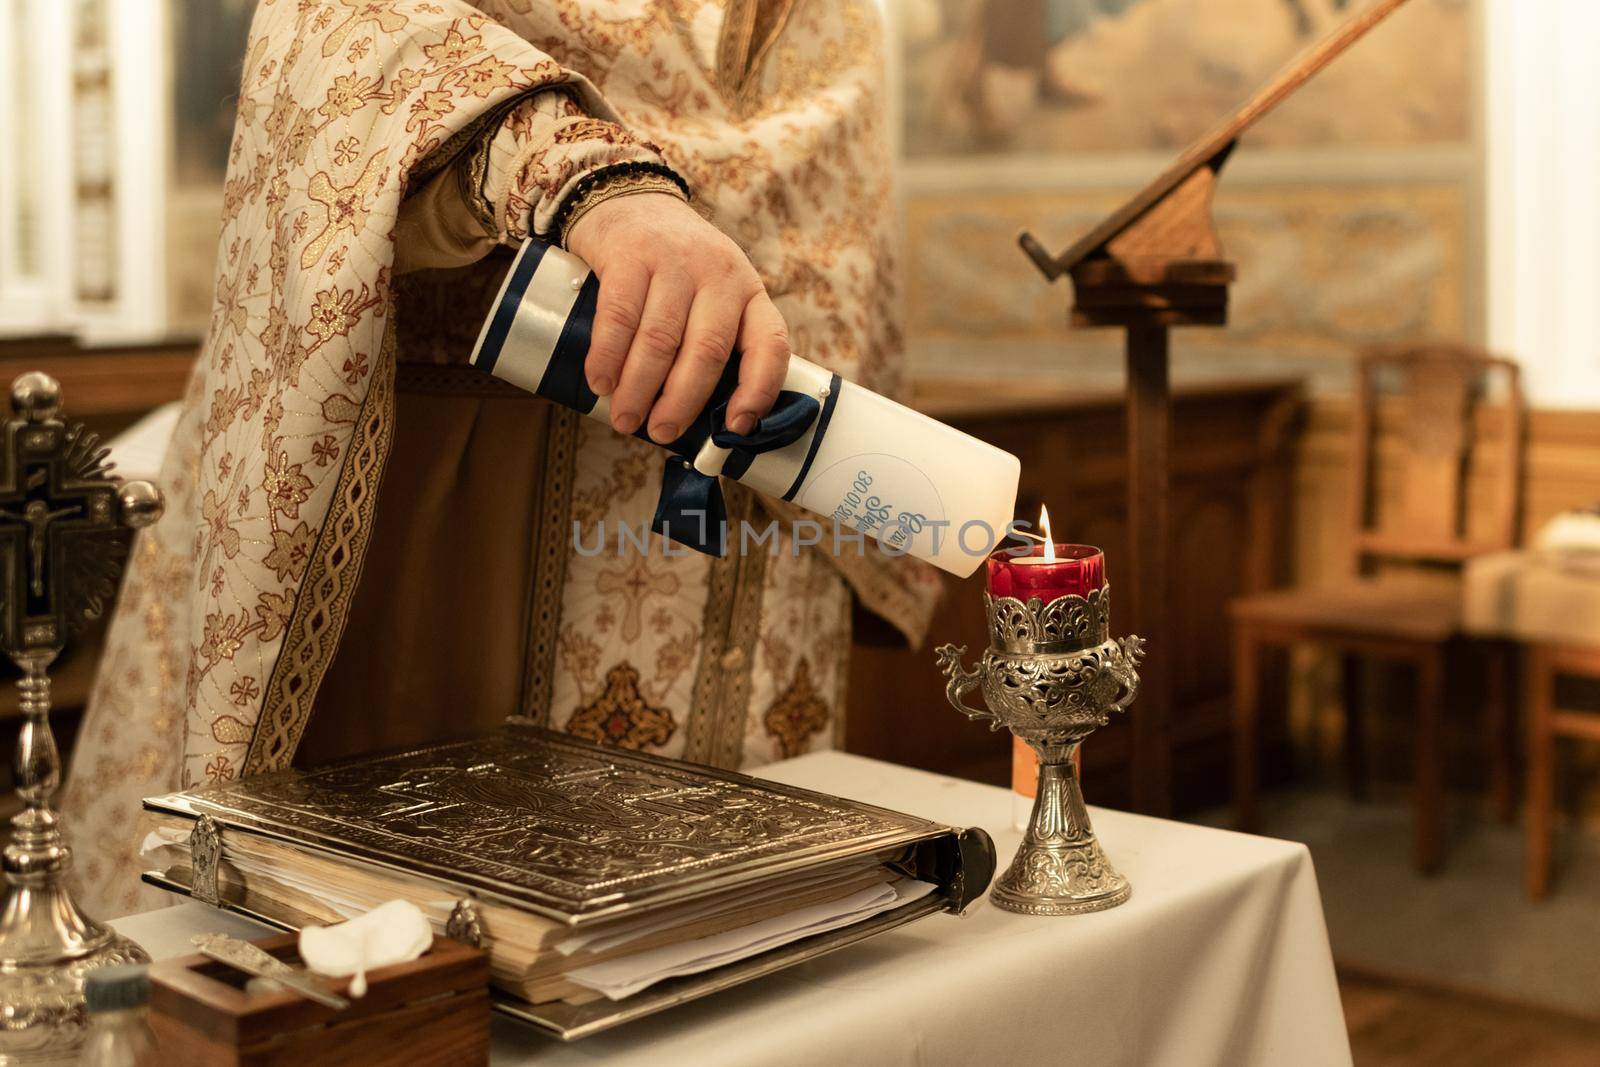 The priest lights a candle for the rite of christening